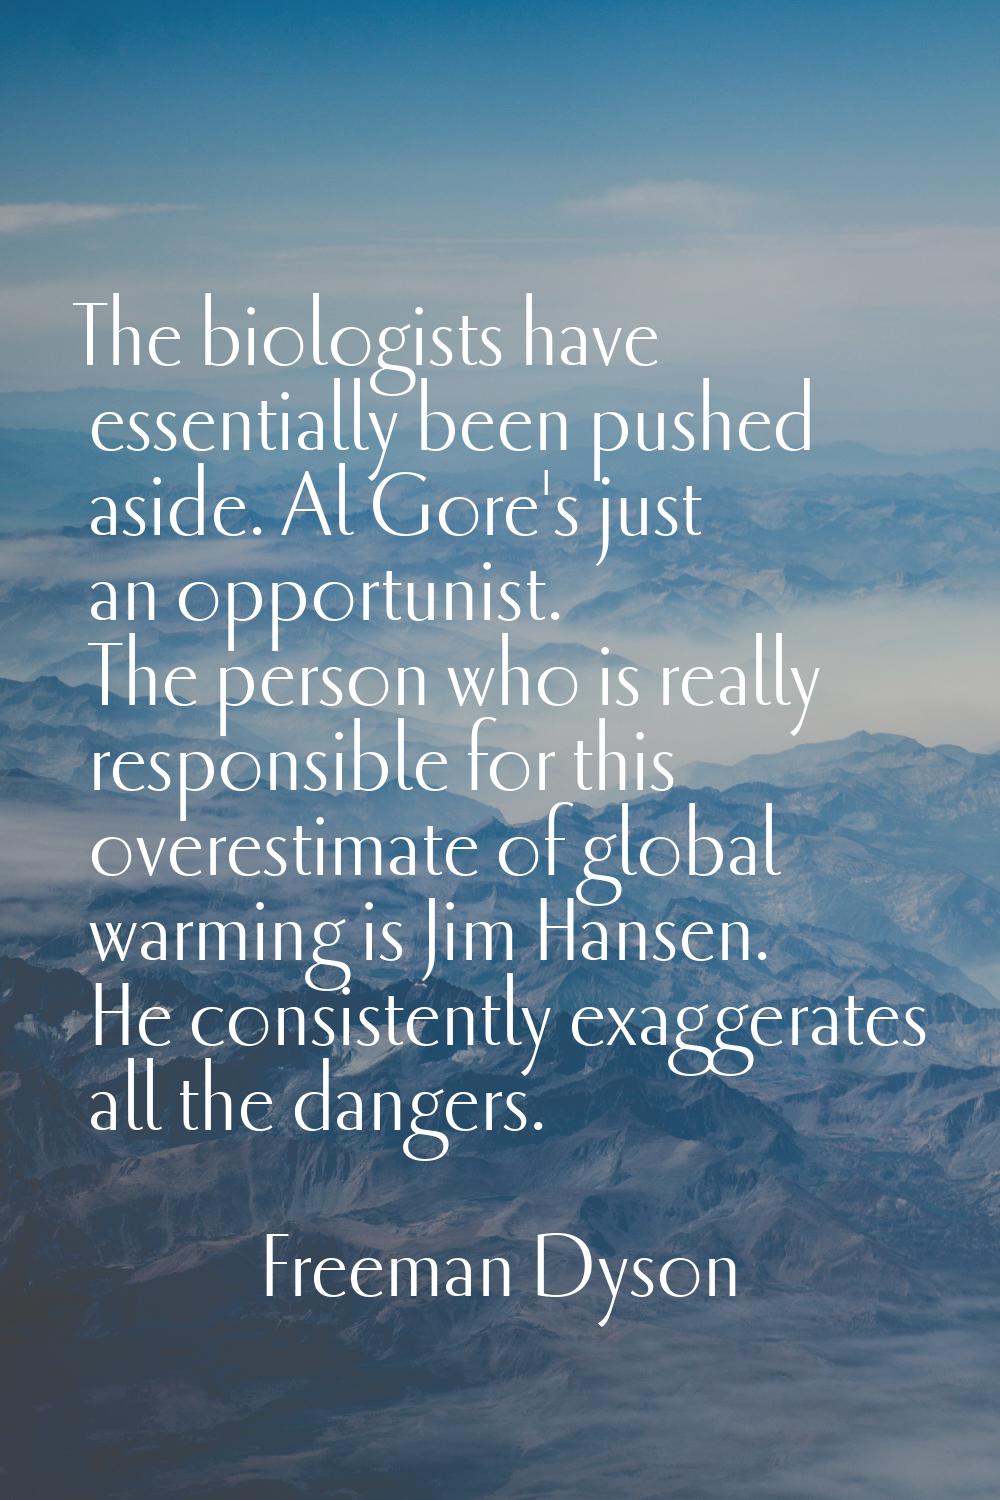 The biologists have essentially been pushed aside. Al Gore's just an opportunist. The person who is